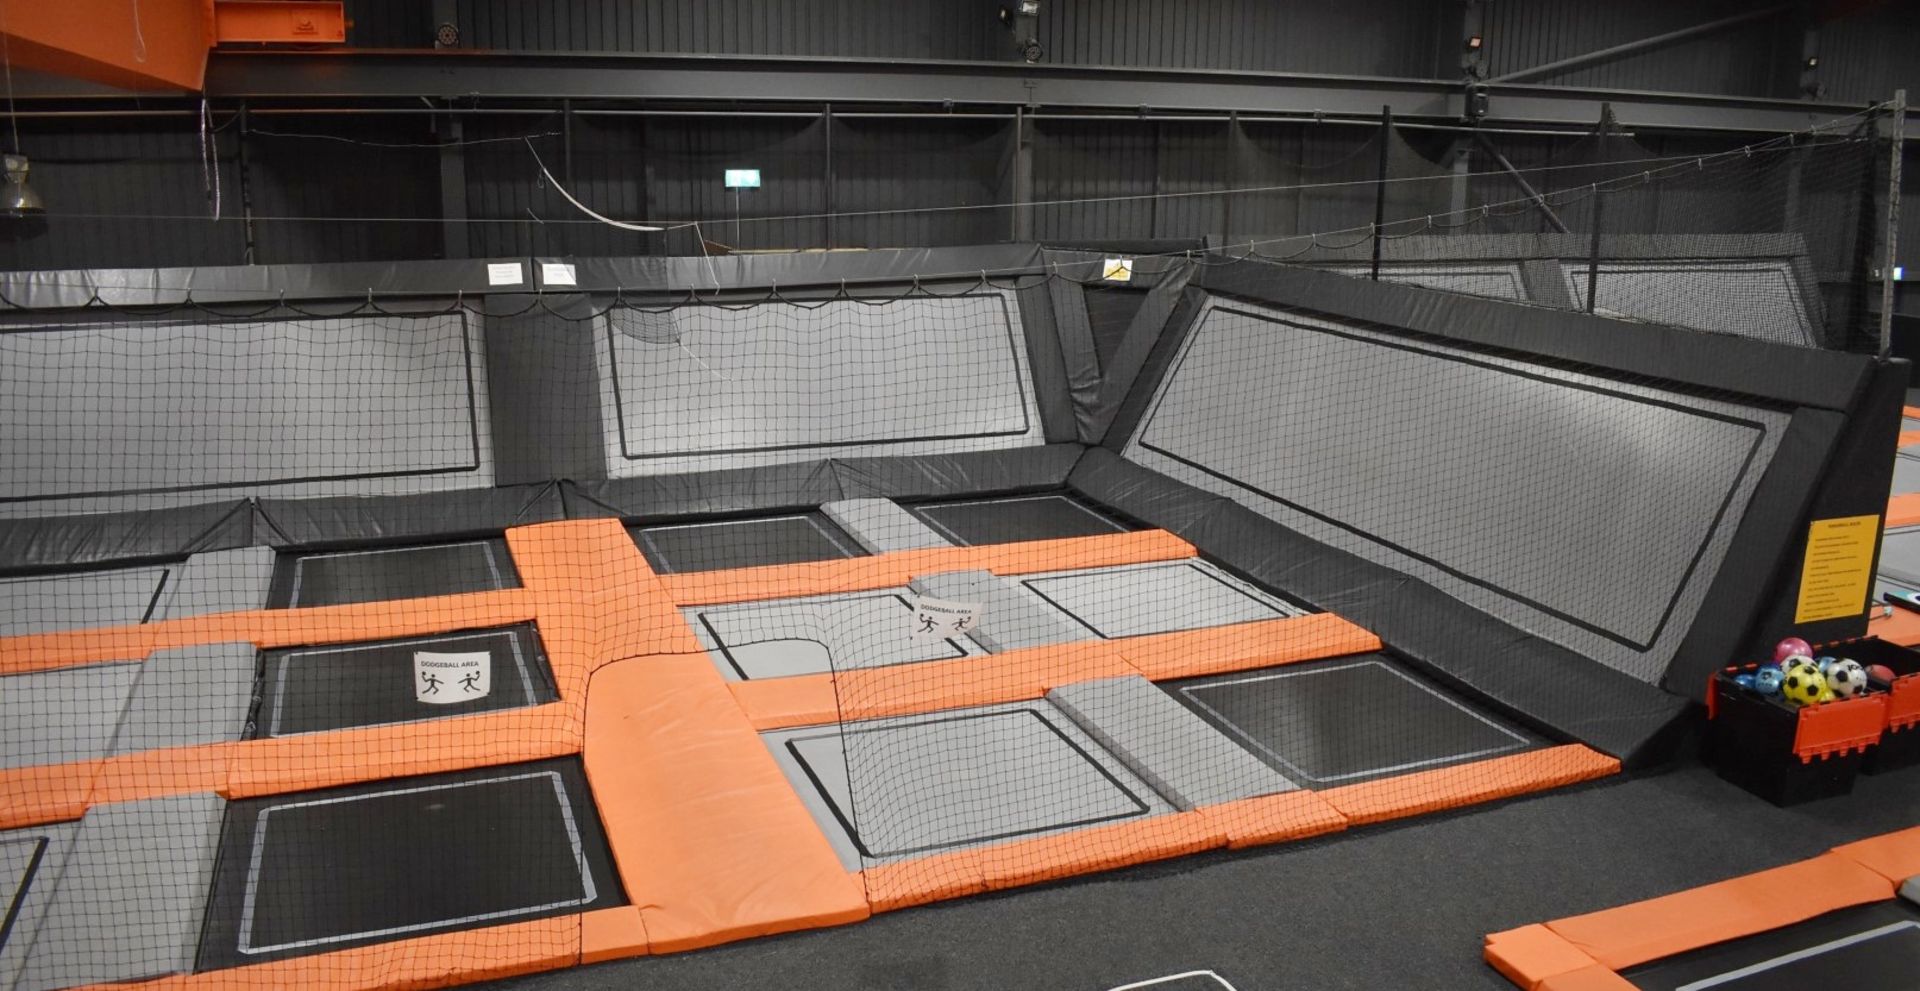 1 x Large Trampoline Park - Disassembled - Includes Dodgeball Arena And Jump Tower - CL766  - - Image 75 of 99